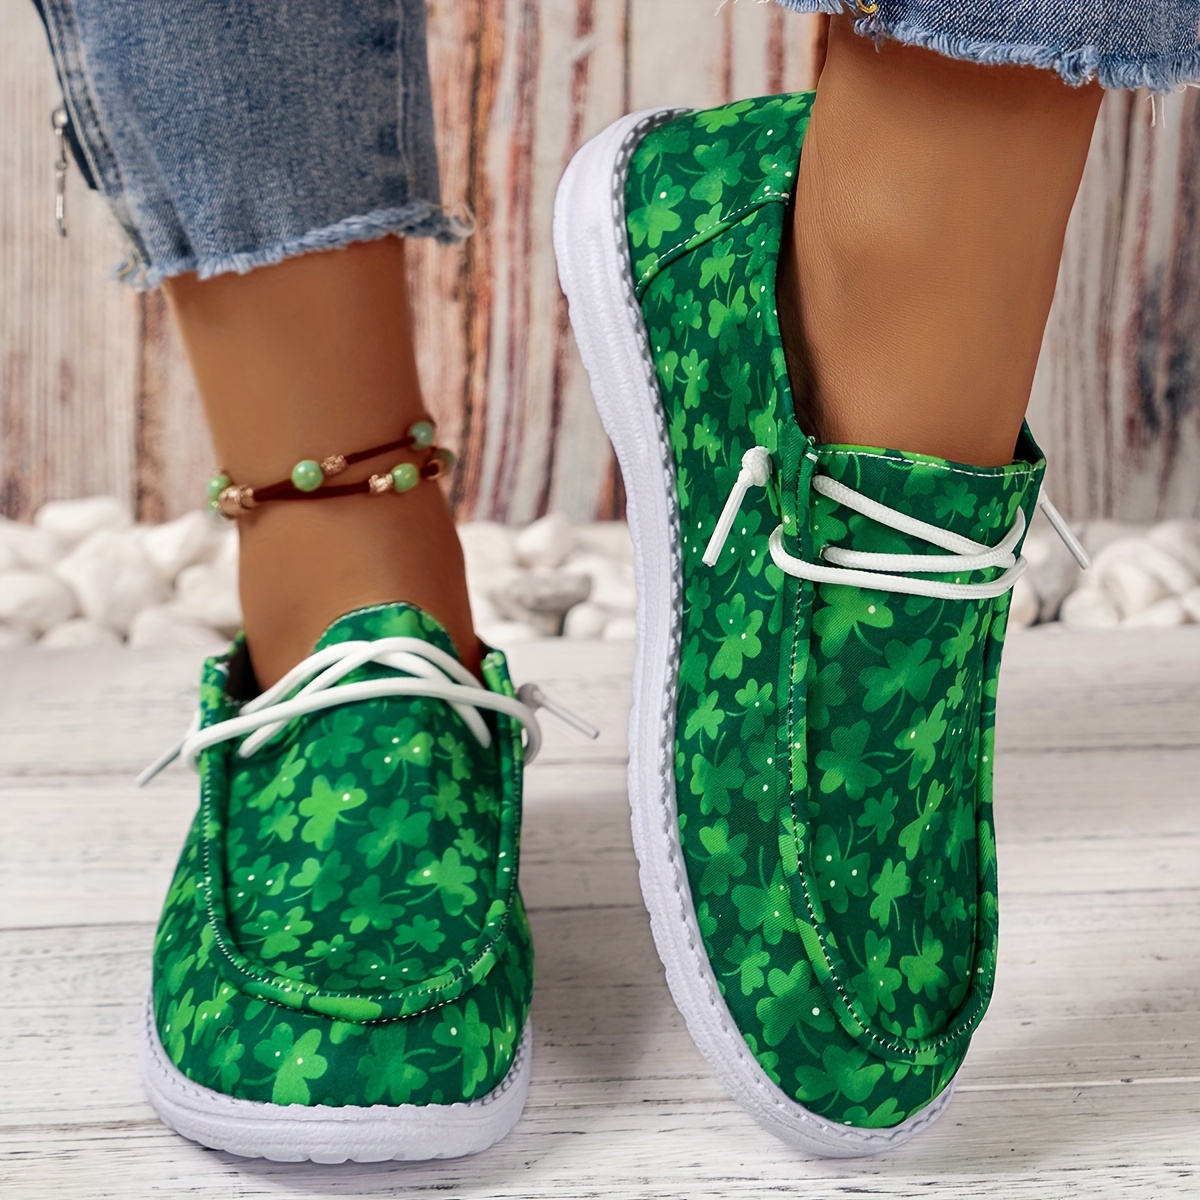 

Green Floral Pattern Slip On Flat Shoes, Women's Fashion Shallow Mouth Casual Shoes, Lightweight Soft And Comfortable Walking Shoes, Breathable Sport Running Shoes